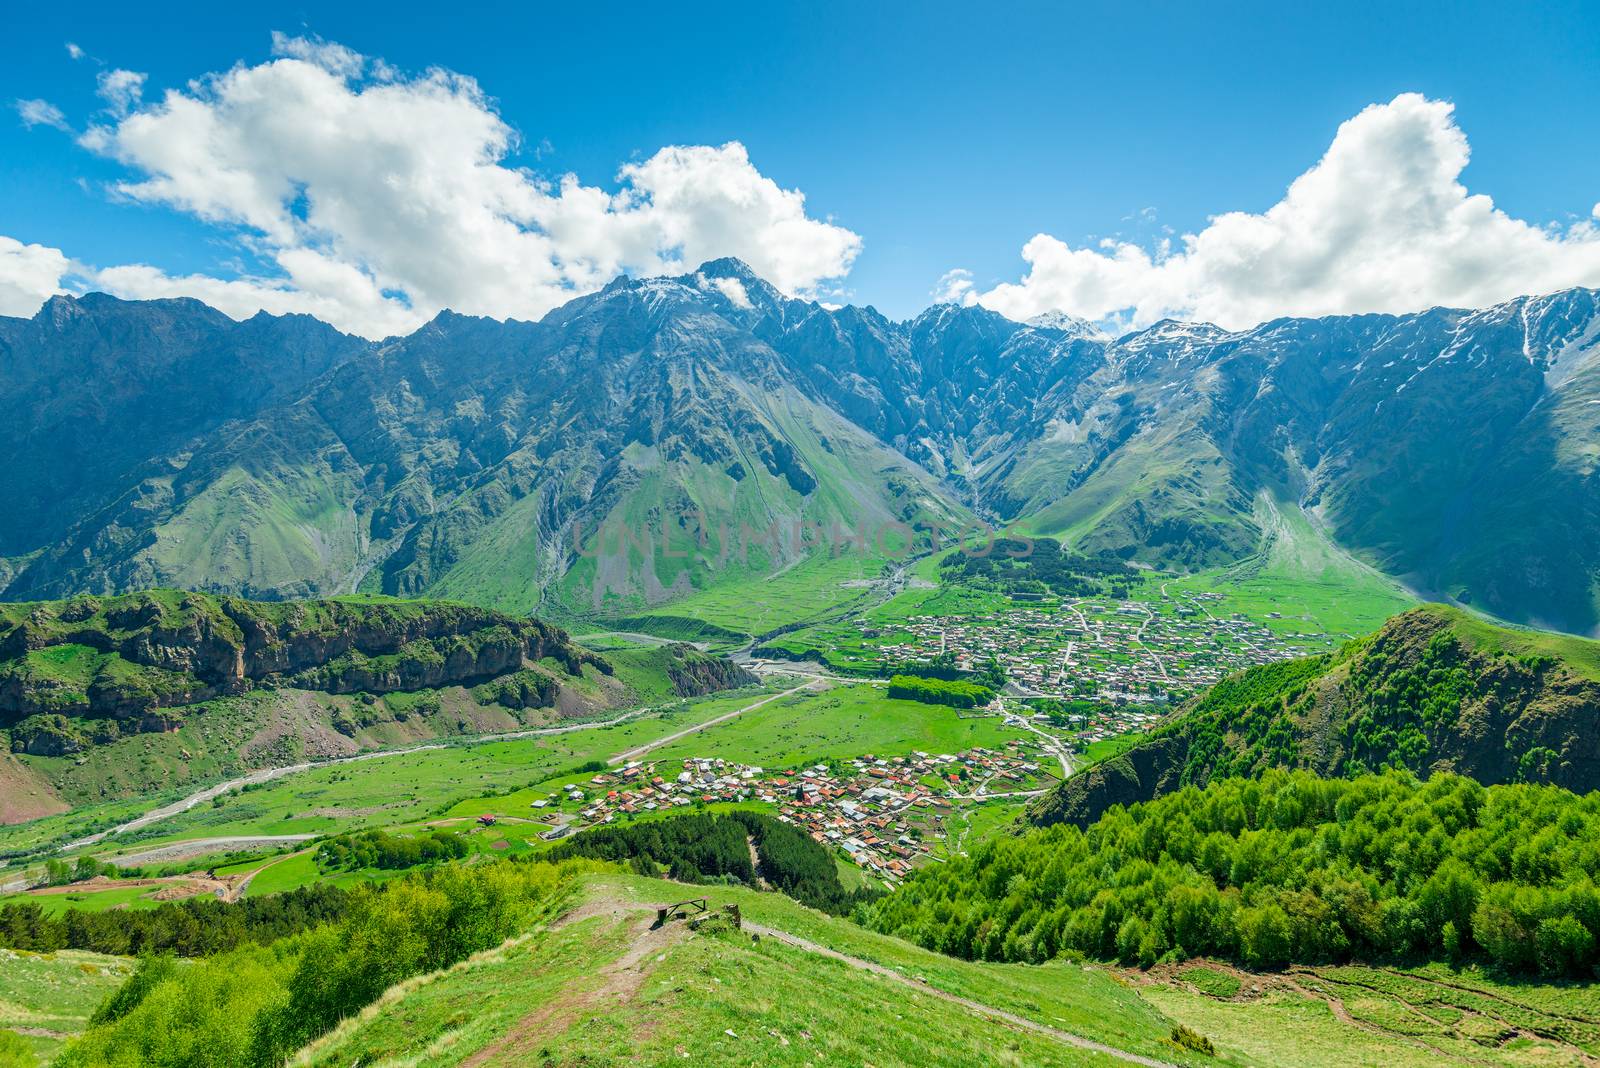 The village of Gergeti in the valley of the Caucasus in Georgia against the backdrop of high beautiful mountains